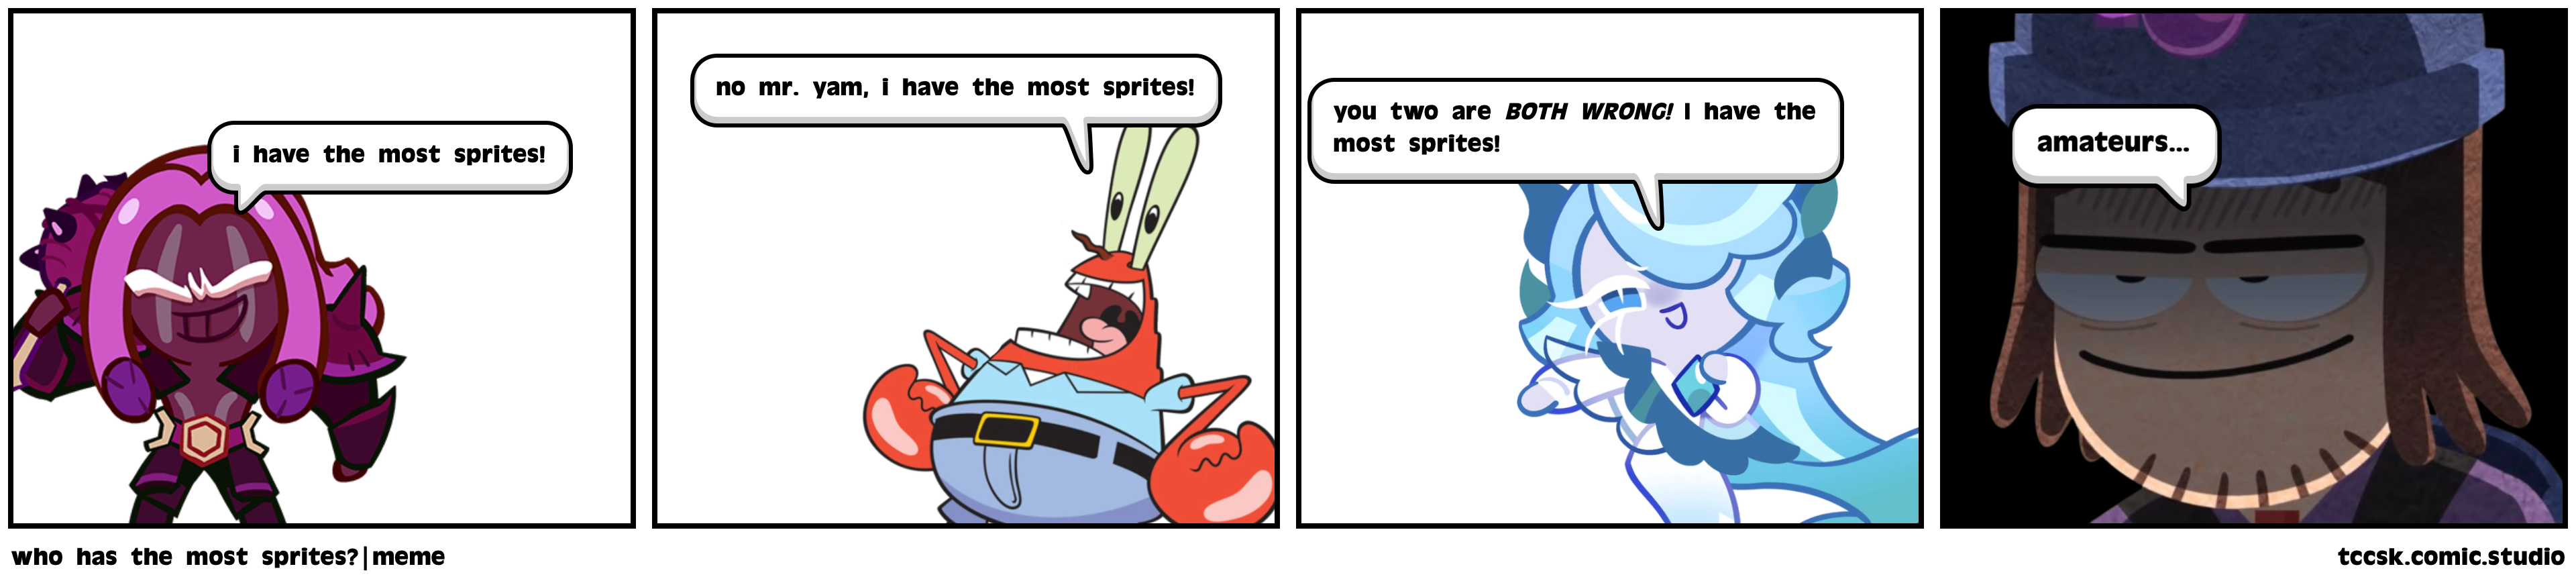 who has the most sprites?|meme